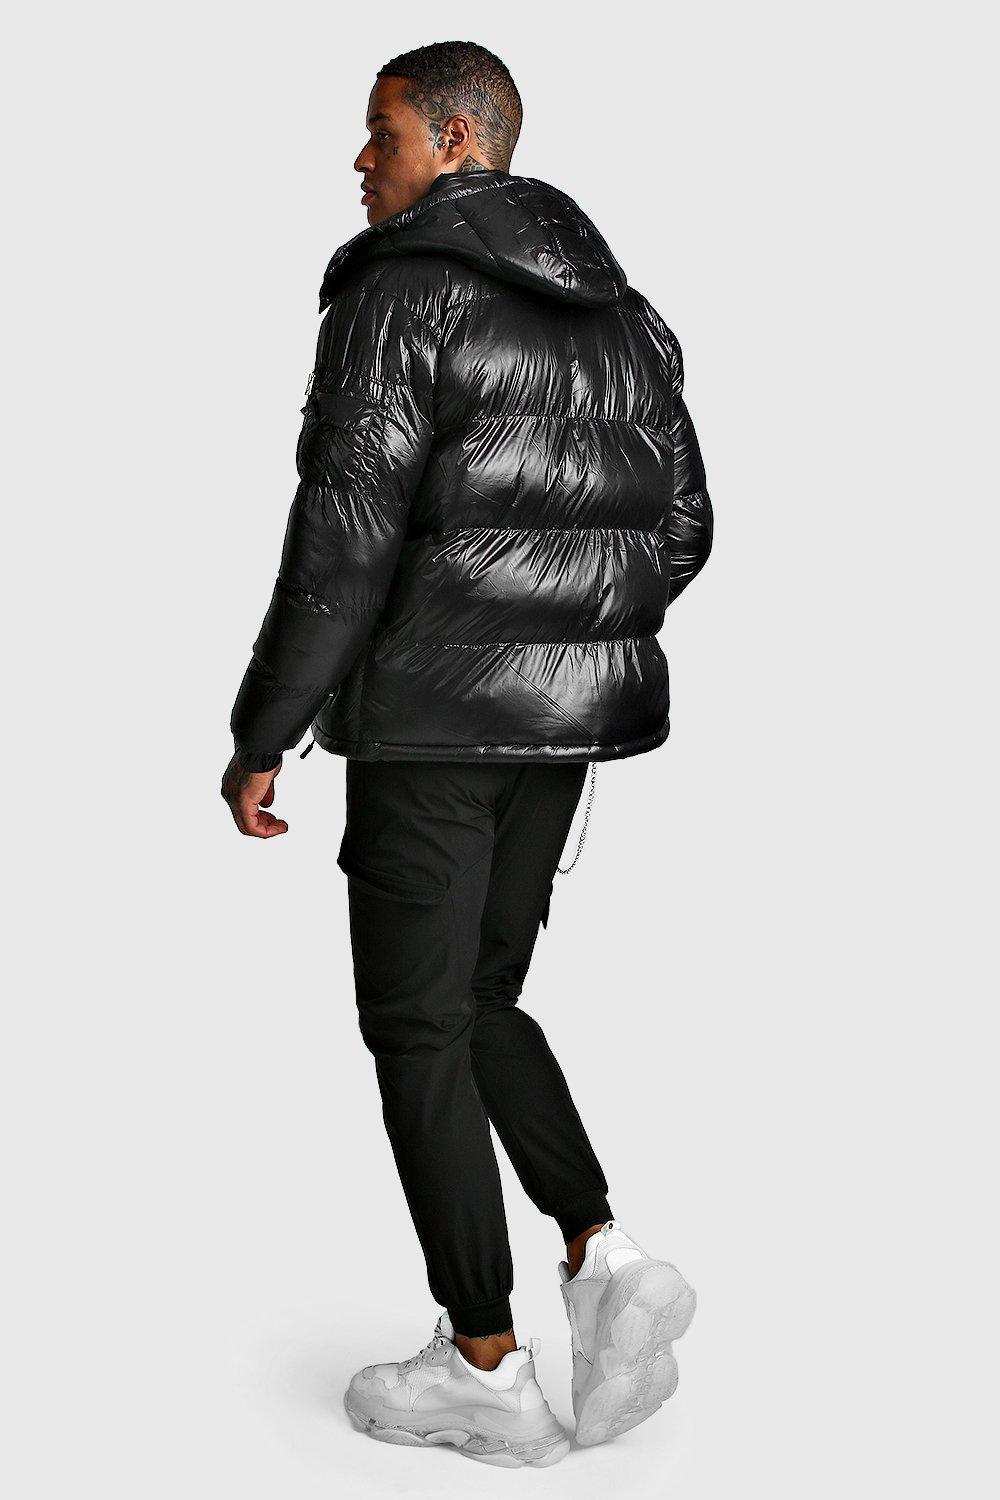 BoohooMAN High Shine Hooded Puffer Jacket in Black for Men | Lyst